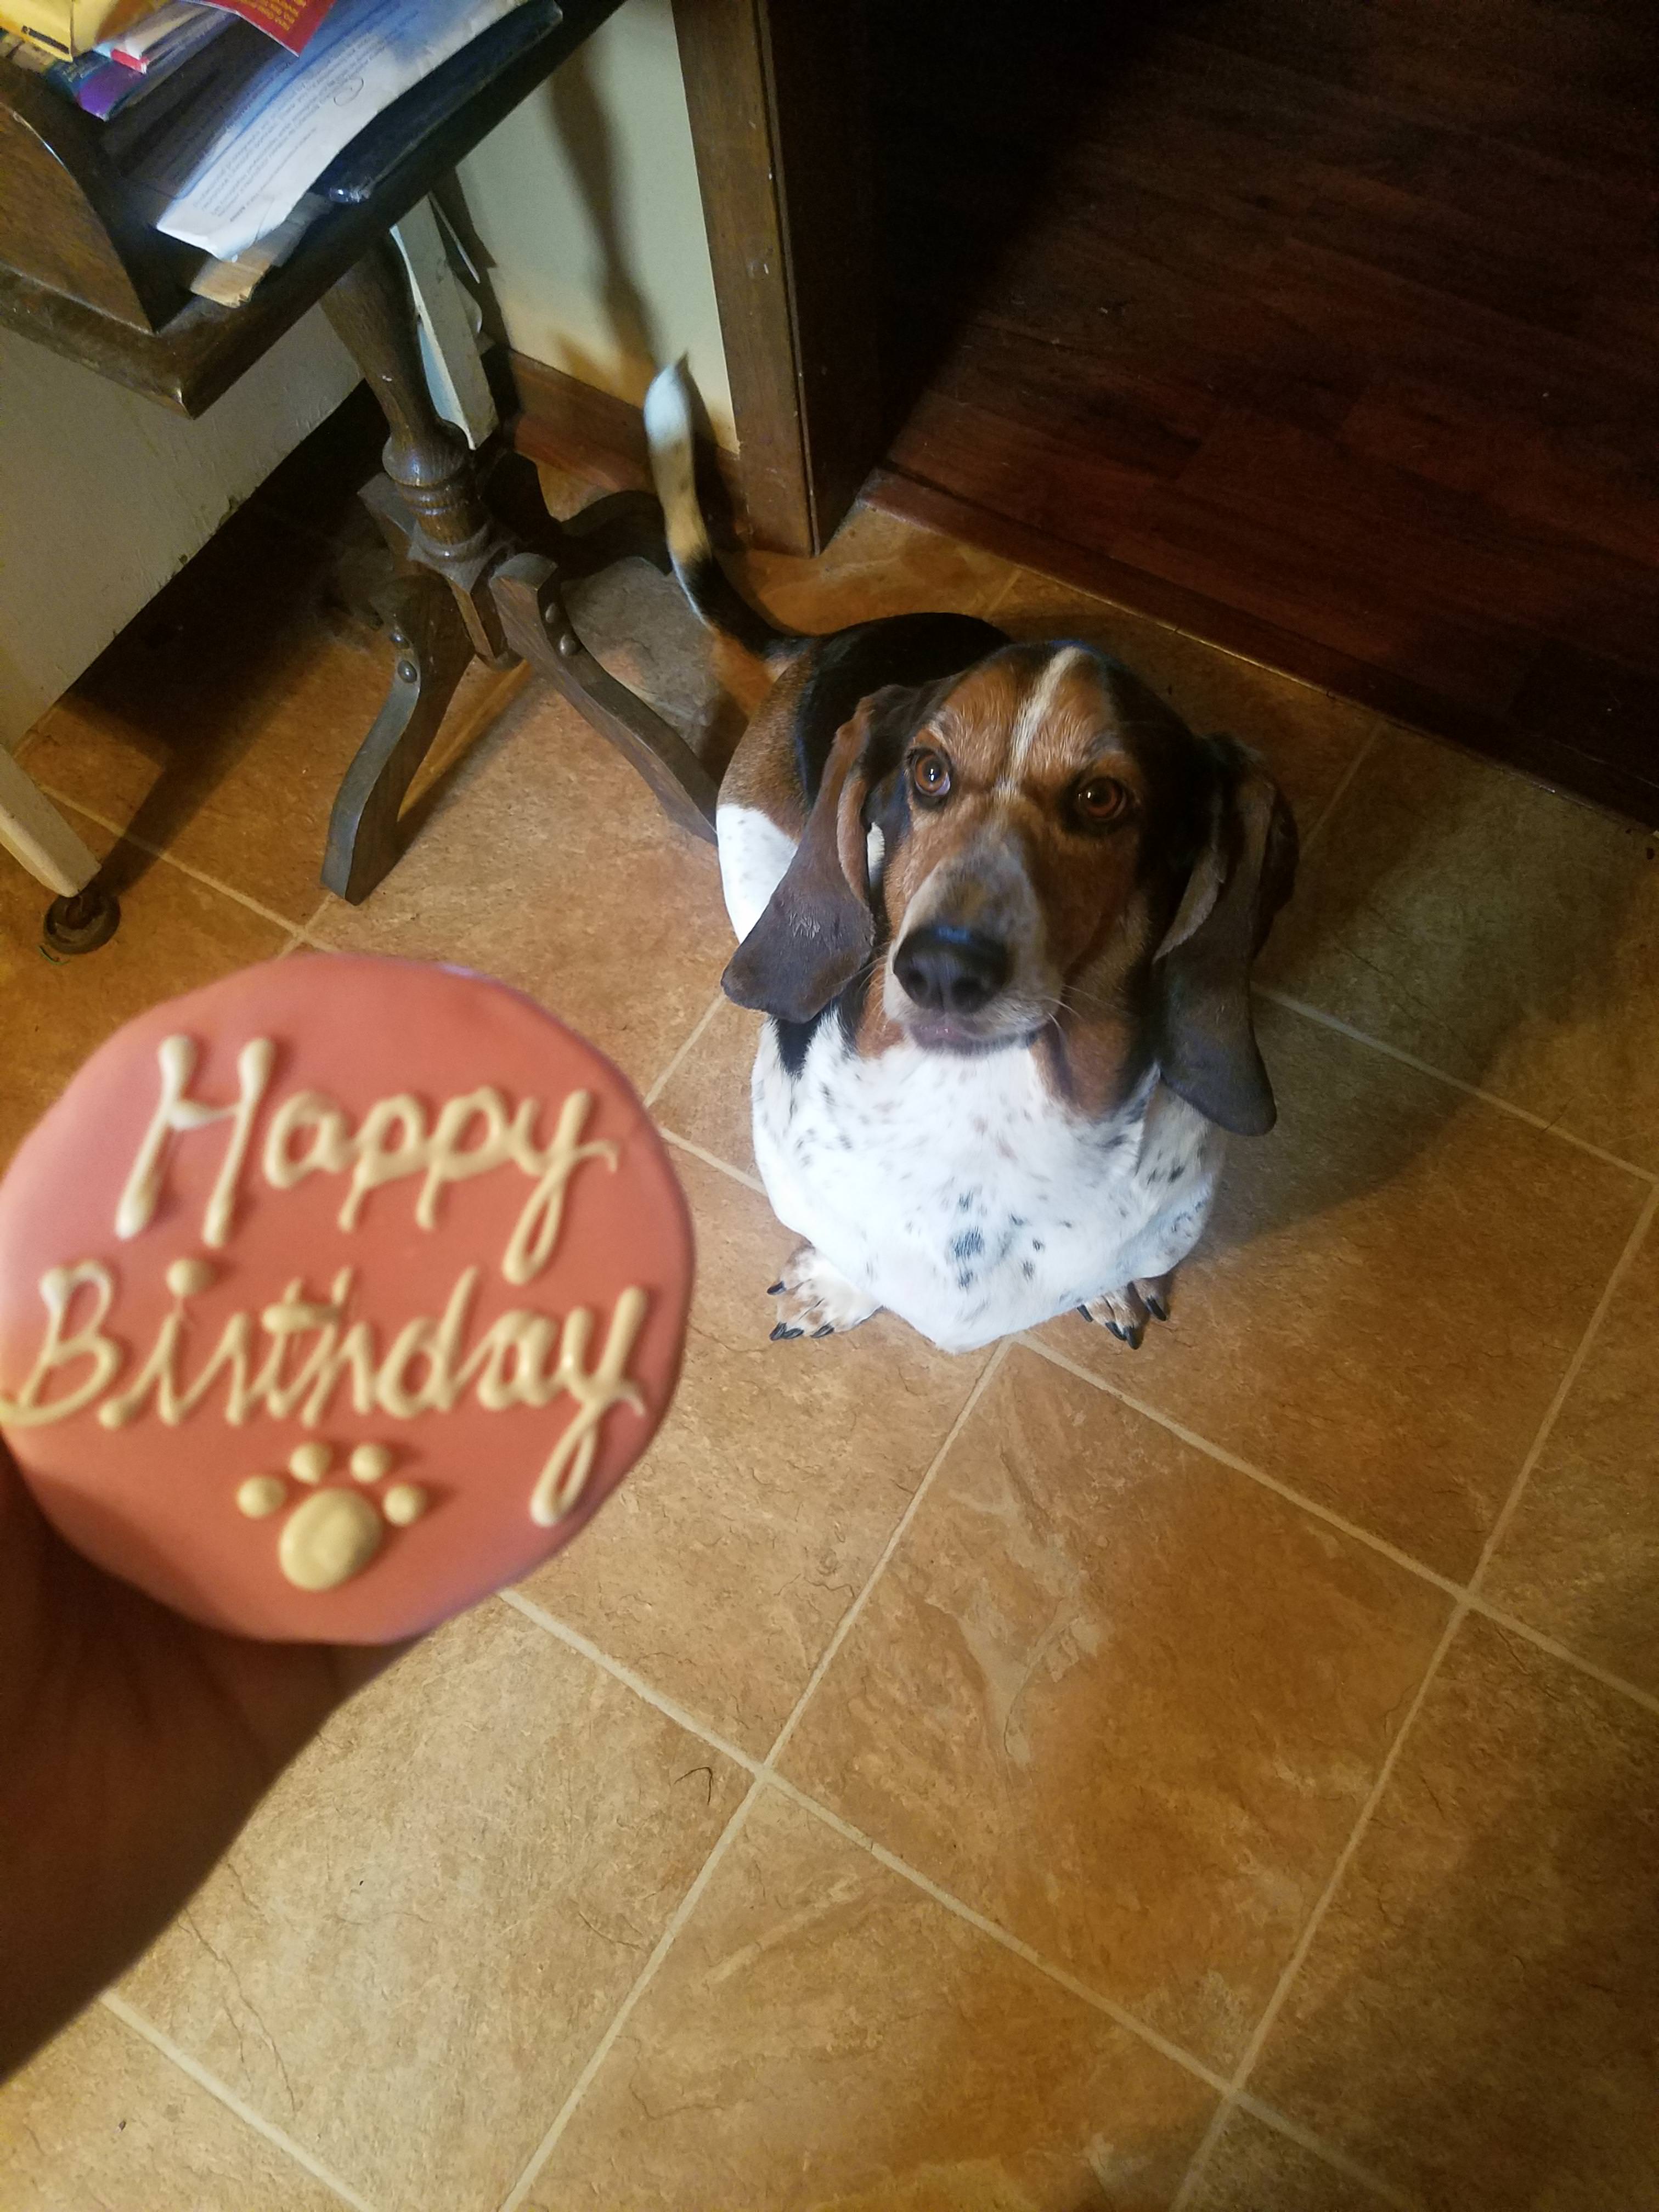 Basset Hound on the floor while looking at his owner whos is holding a treat with the words 